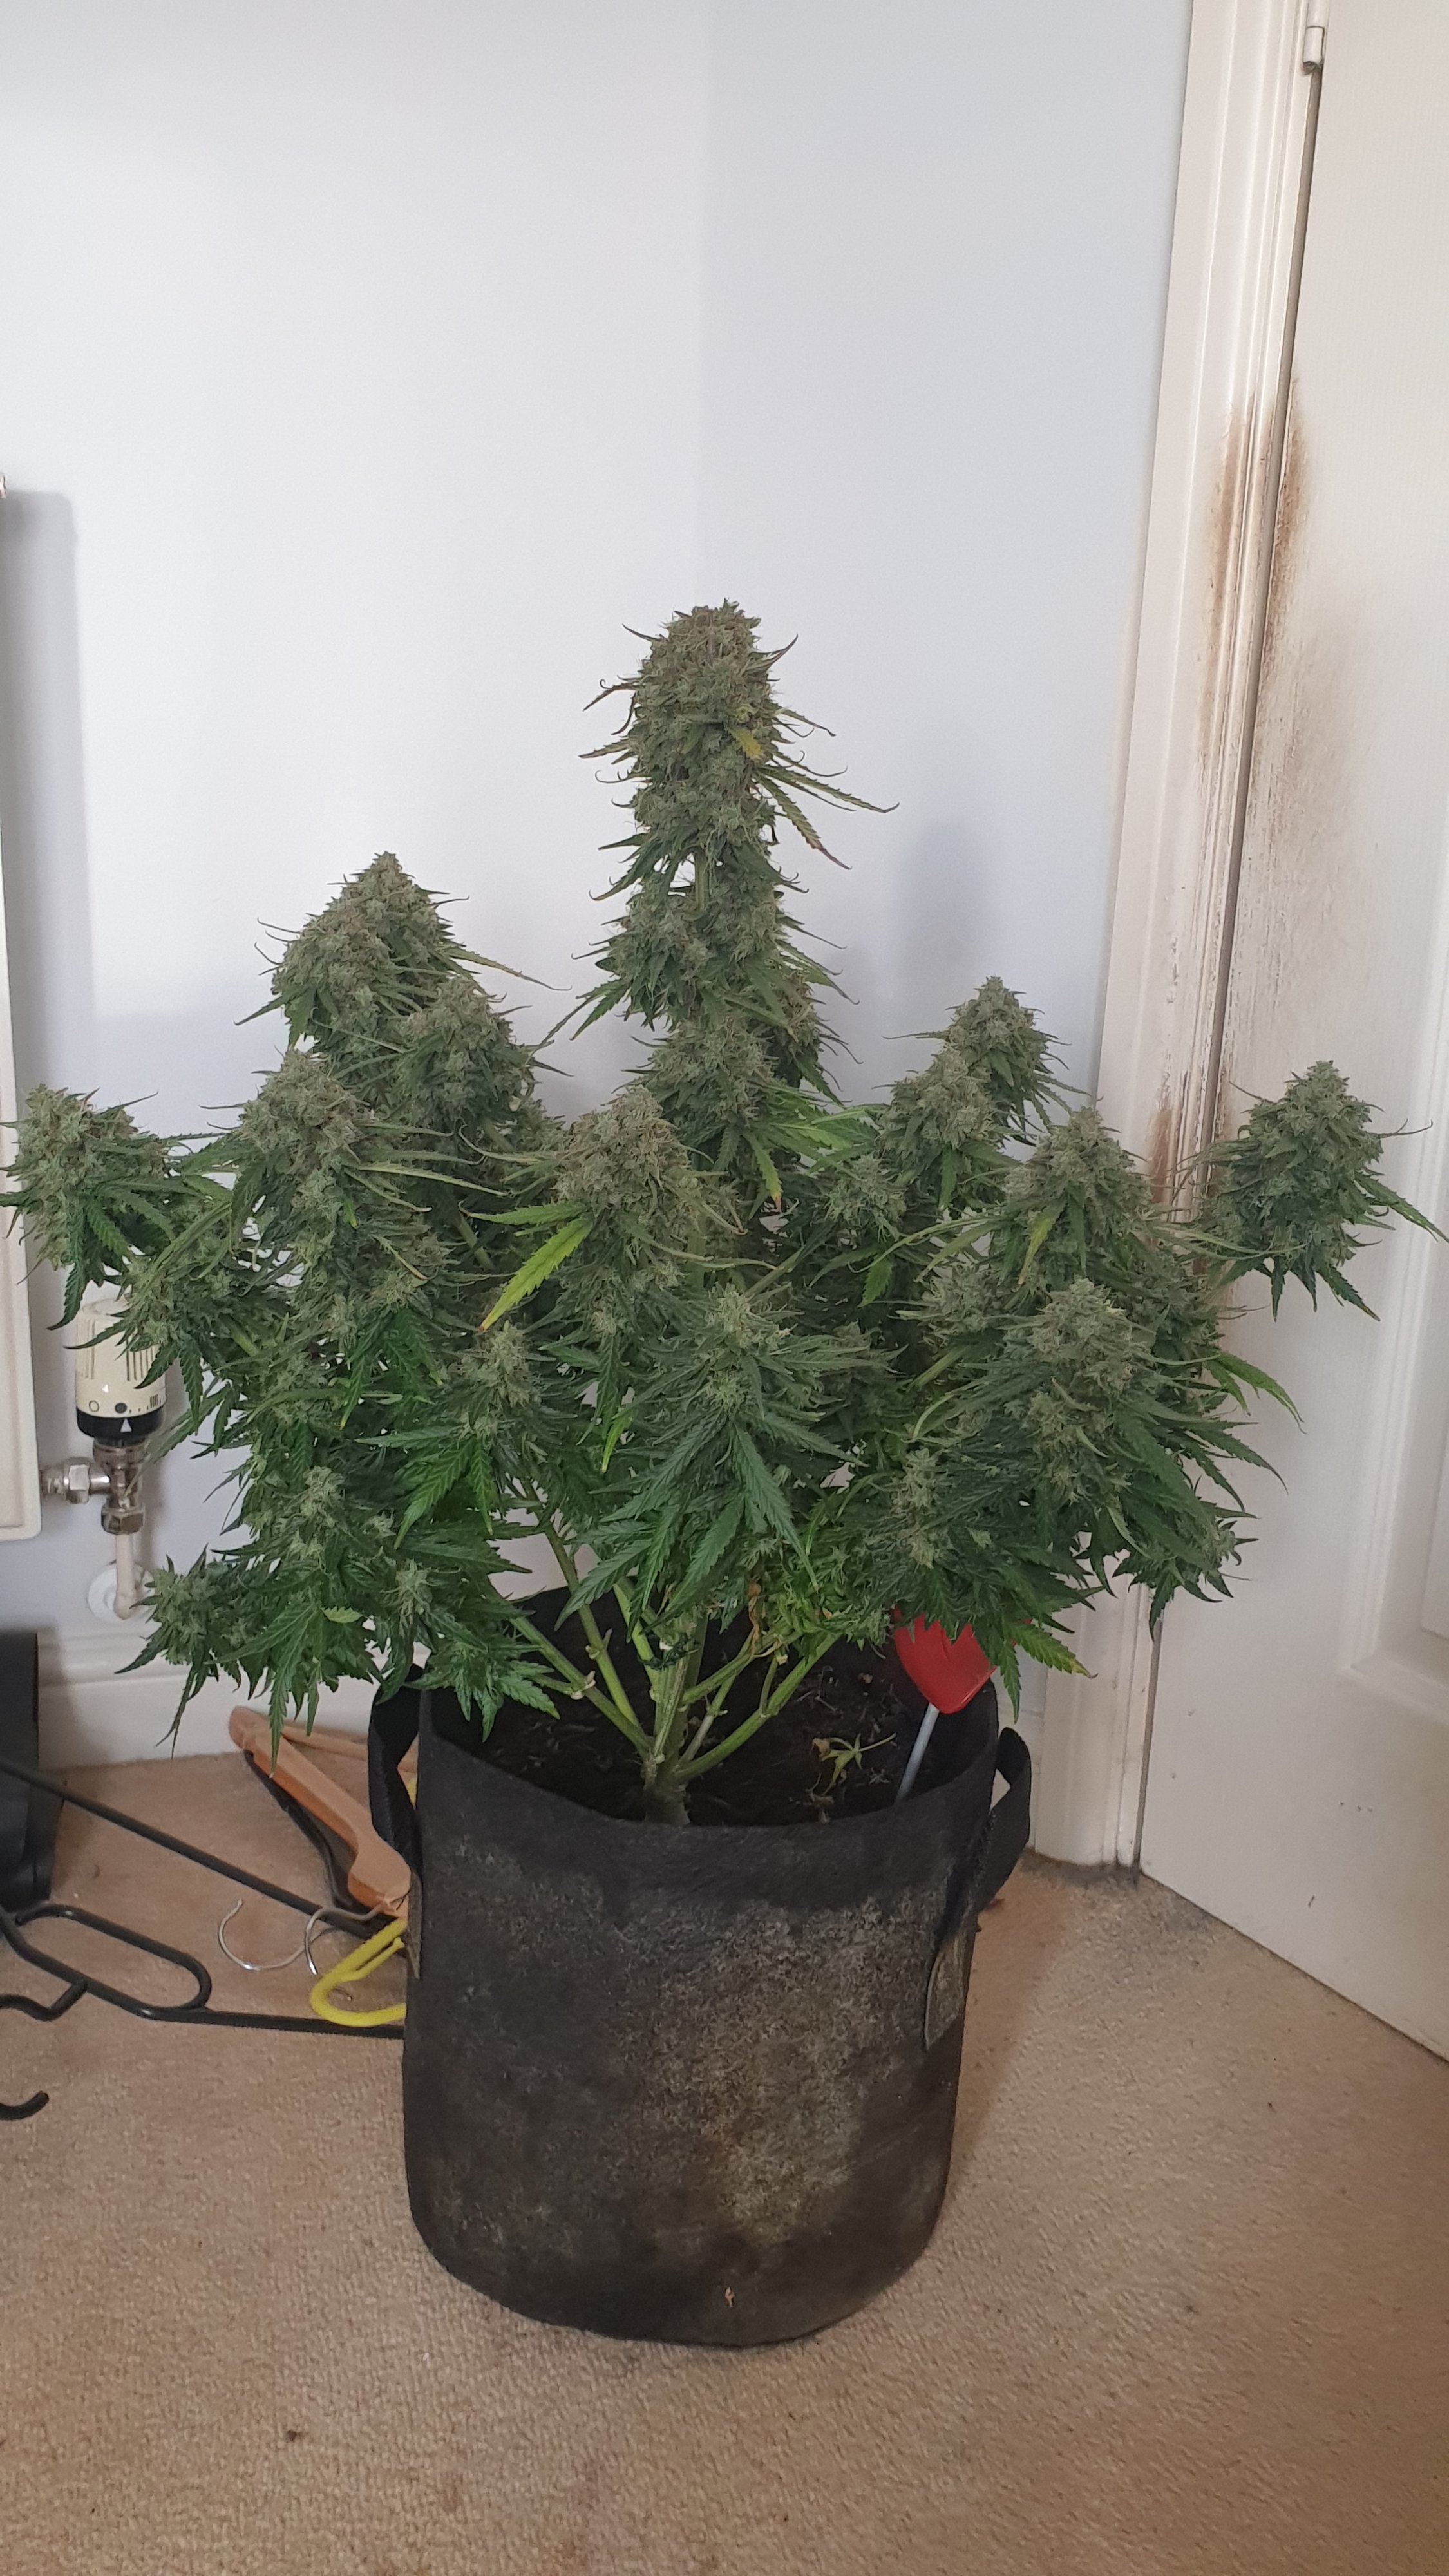 Well there she finally is my first succesful auto grow lol